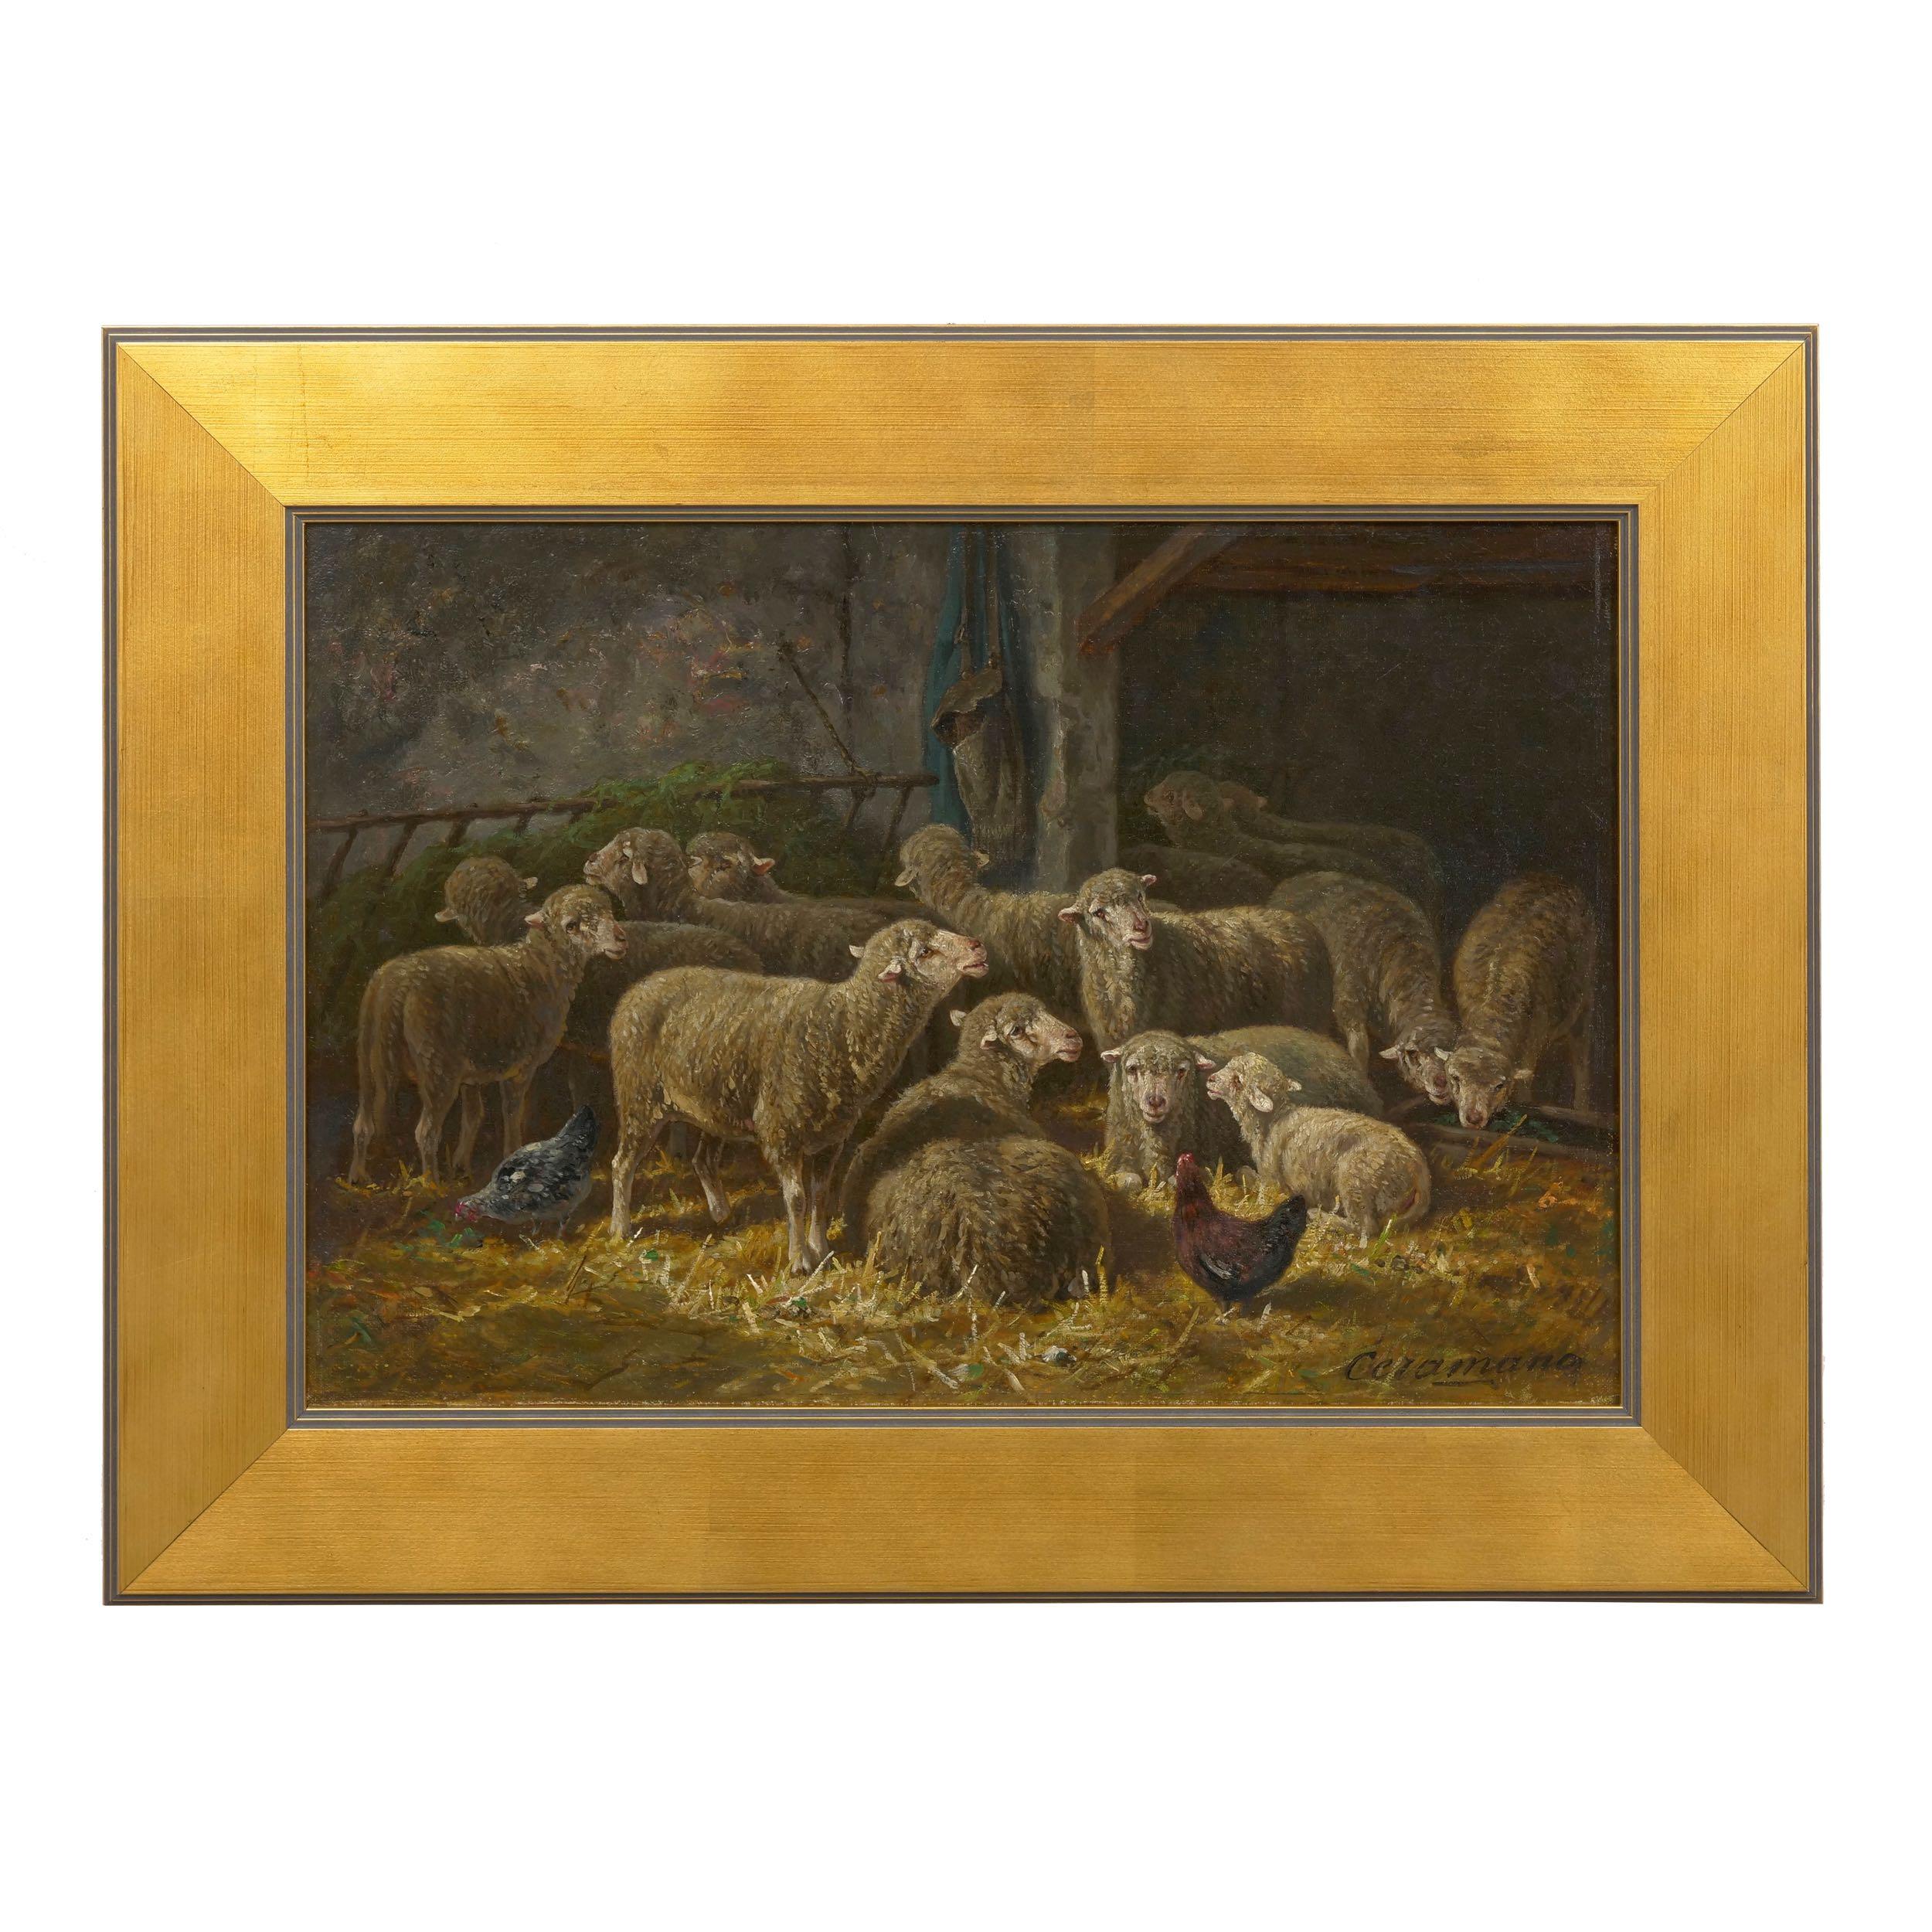 This fine late Barbizon painting of a fold of sheep resting in a barn is notable for its exquisite detail and complex arrangement. In total we have fifteen sheep gathered together with two chickens pecking at their feet as they relax in the warmth